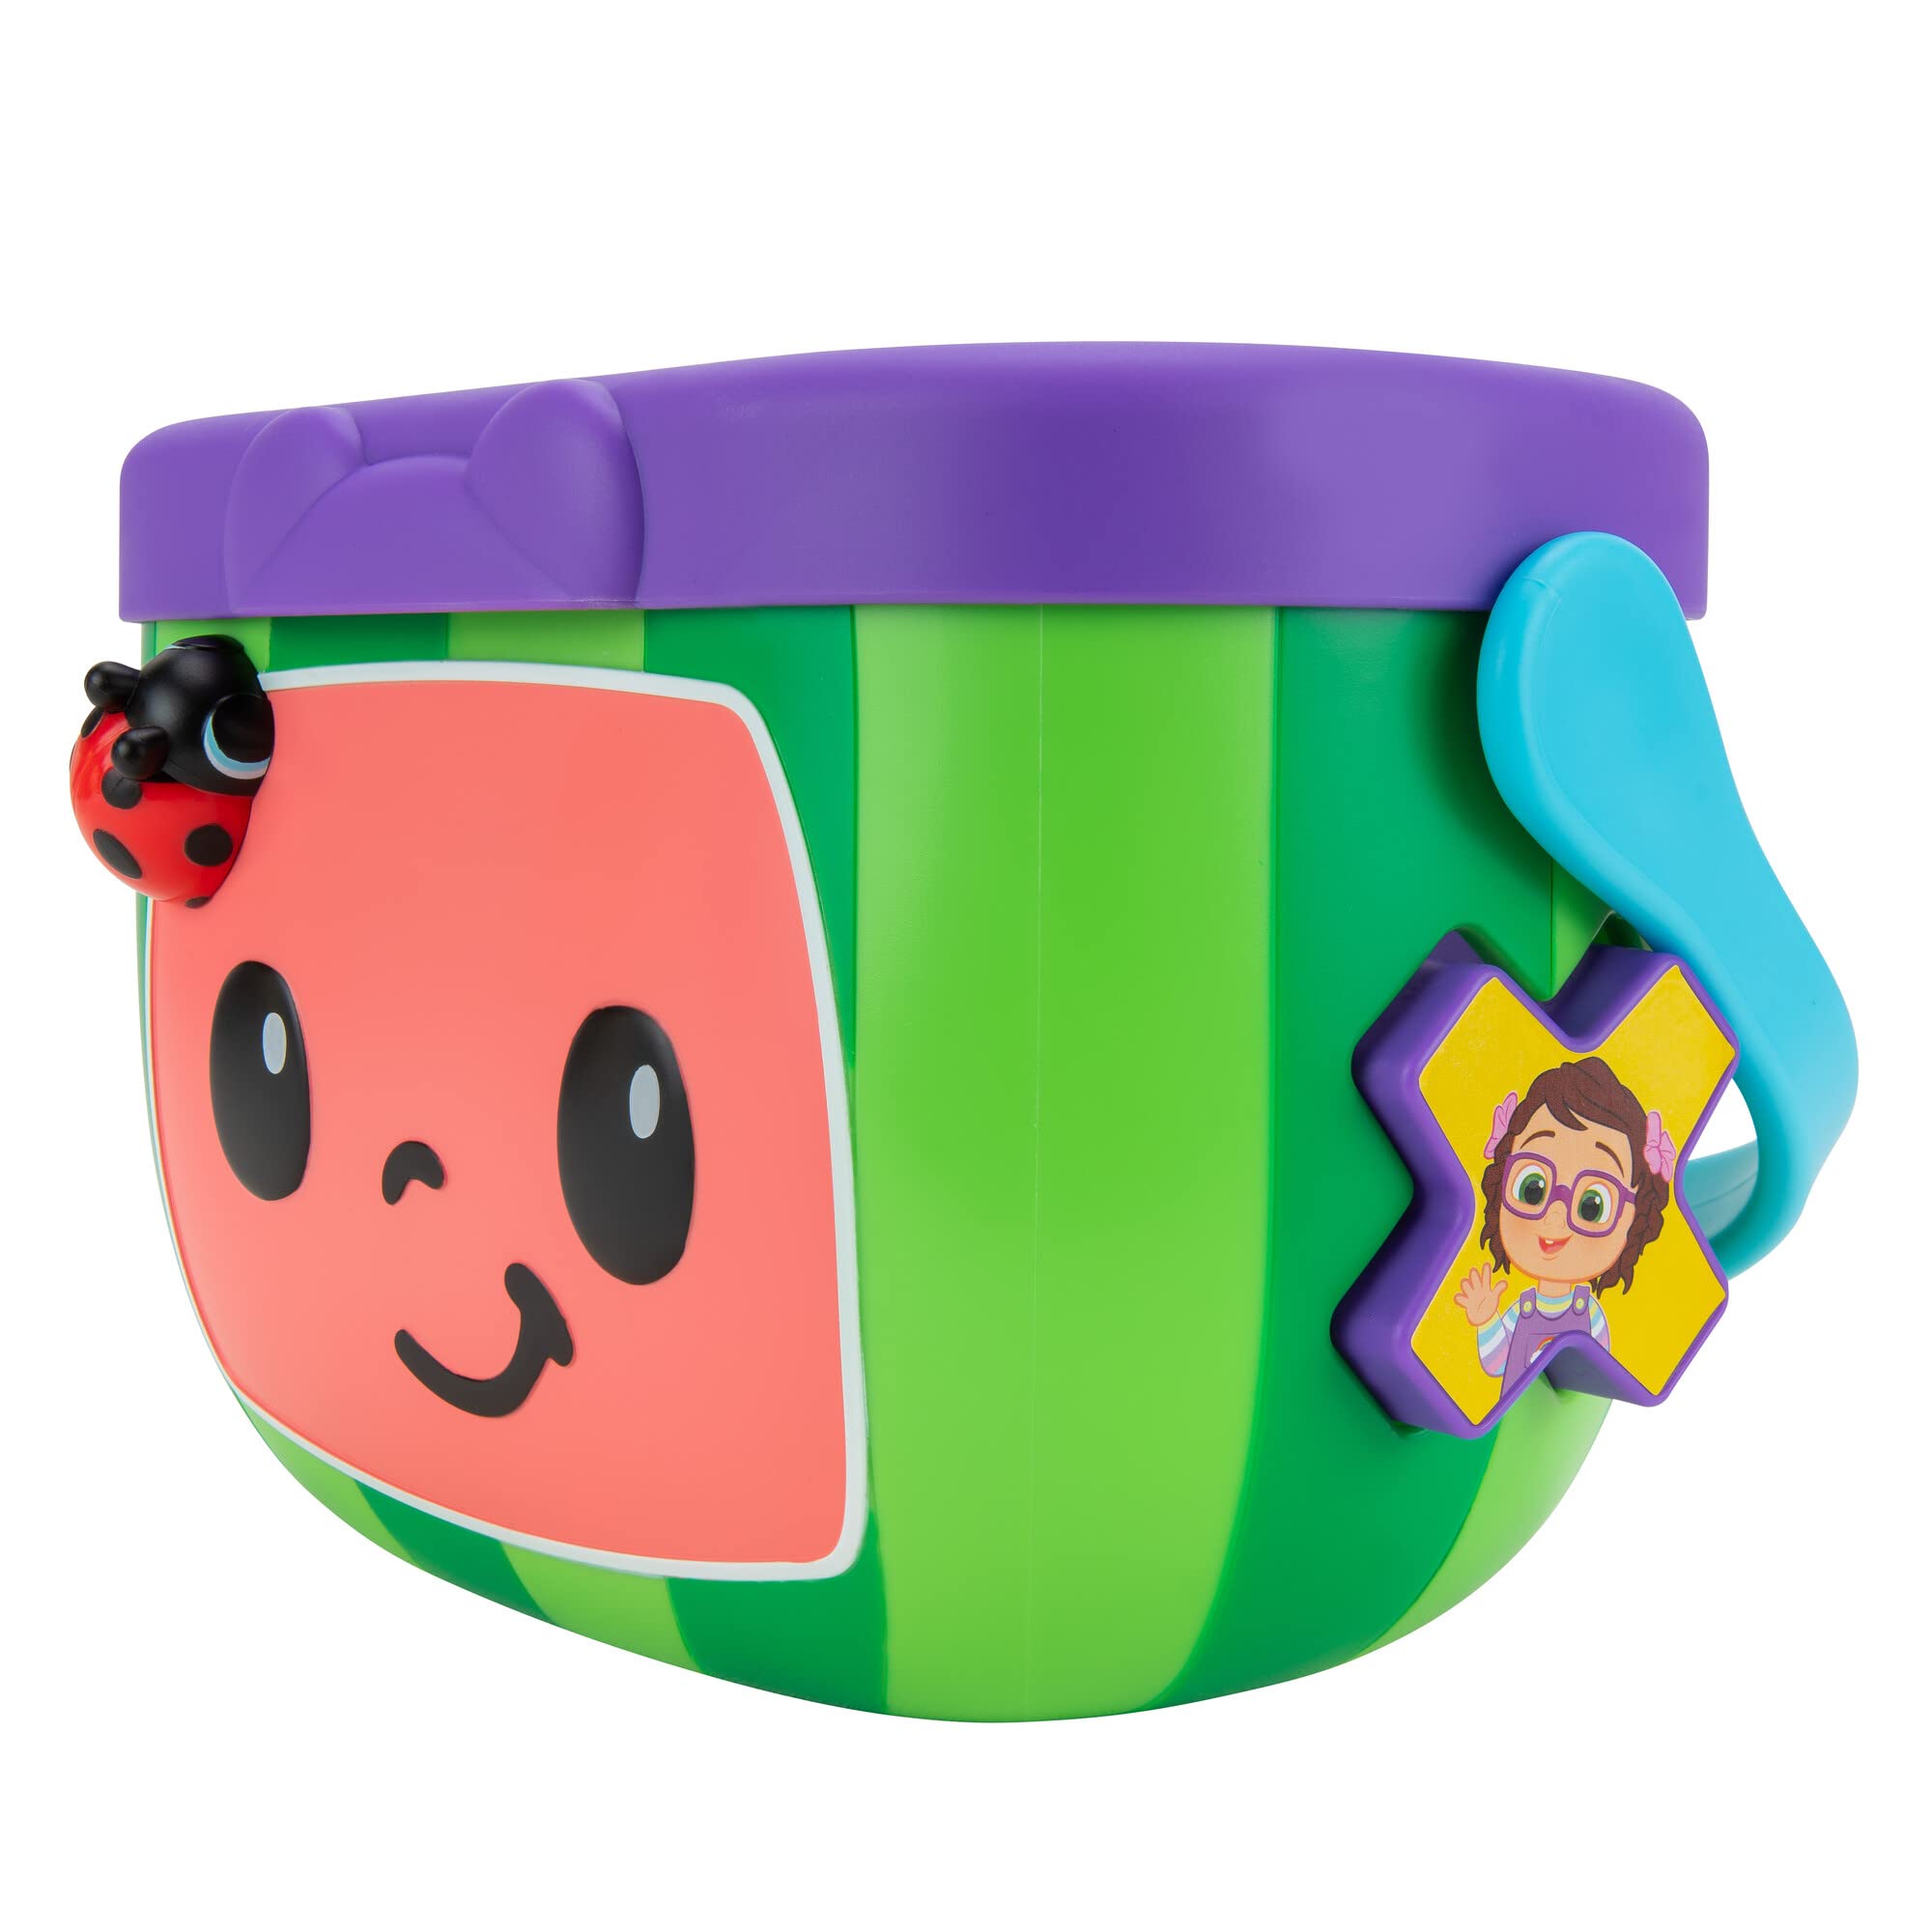 CoComelon Shape Sorter - Identify Shapes - Favorite Characters - Toys for Kids, Toddlers, and Preschoolers